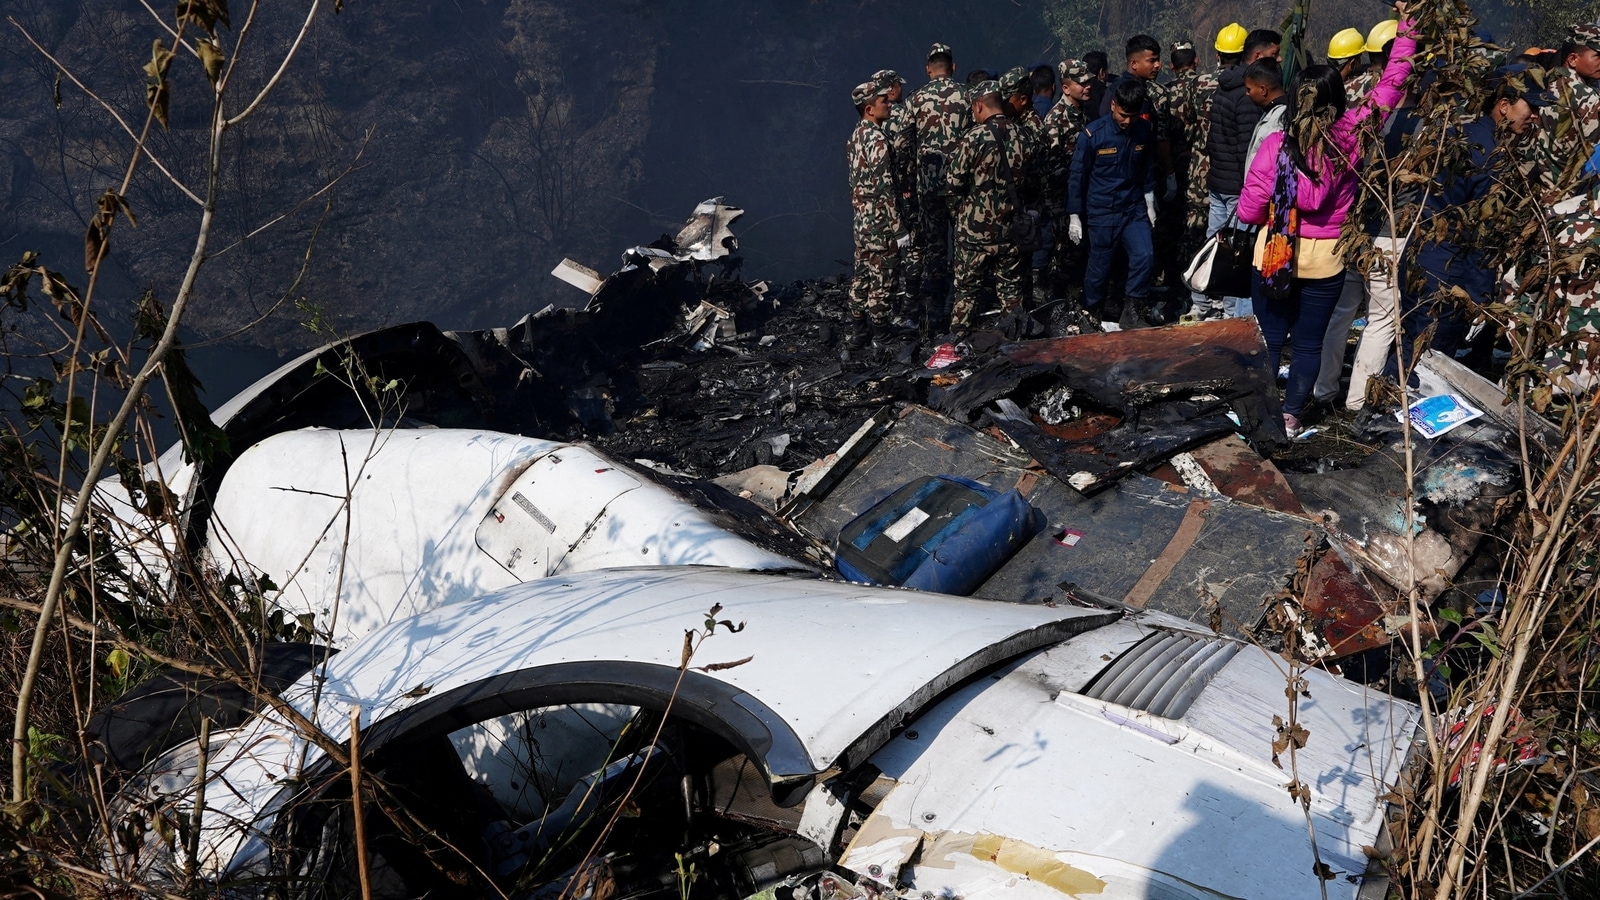 Nepal plane crash victims' families may lose millions in compensation: Report